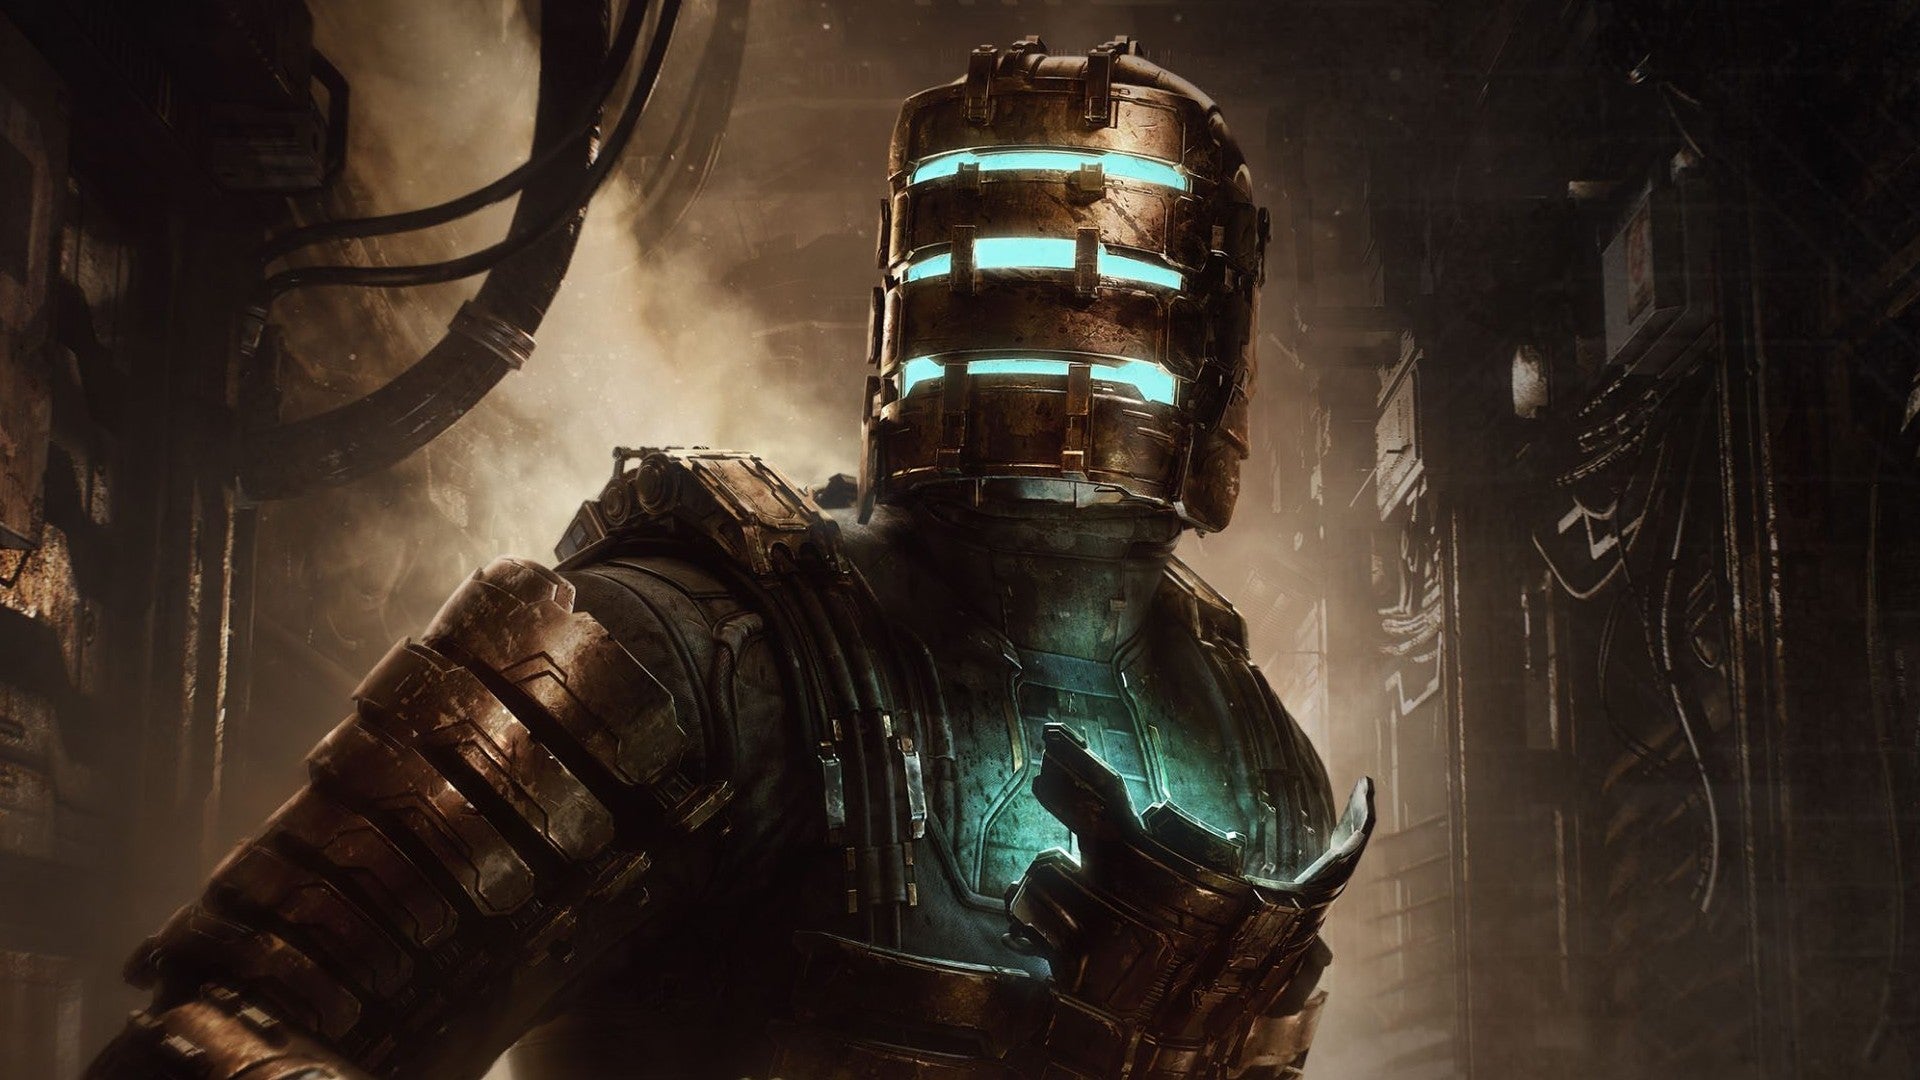 Dead Space image showing a close up of Isaac Clarke wearing his helmet.